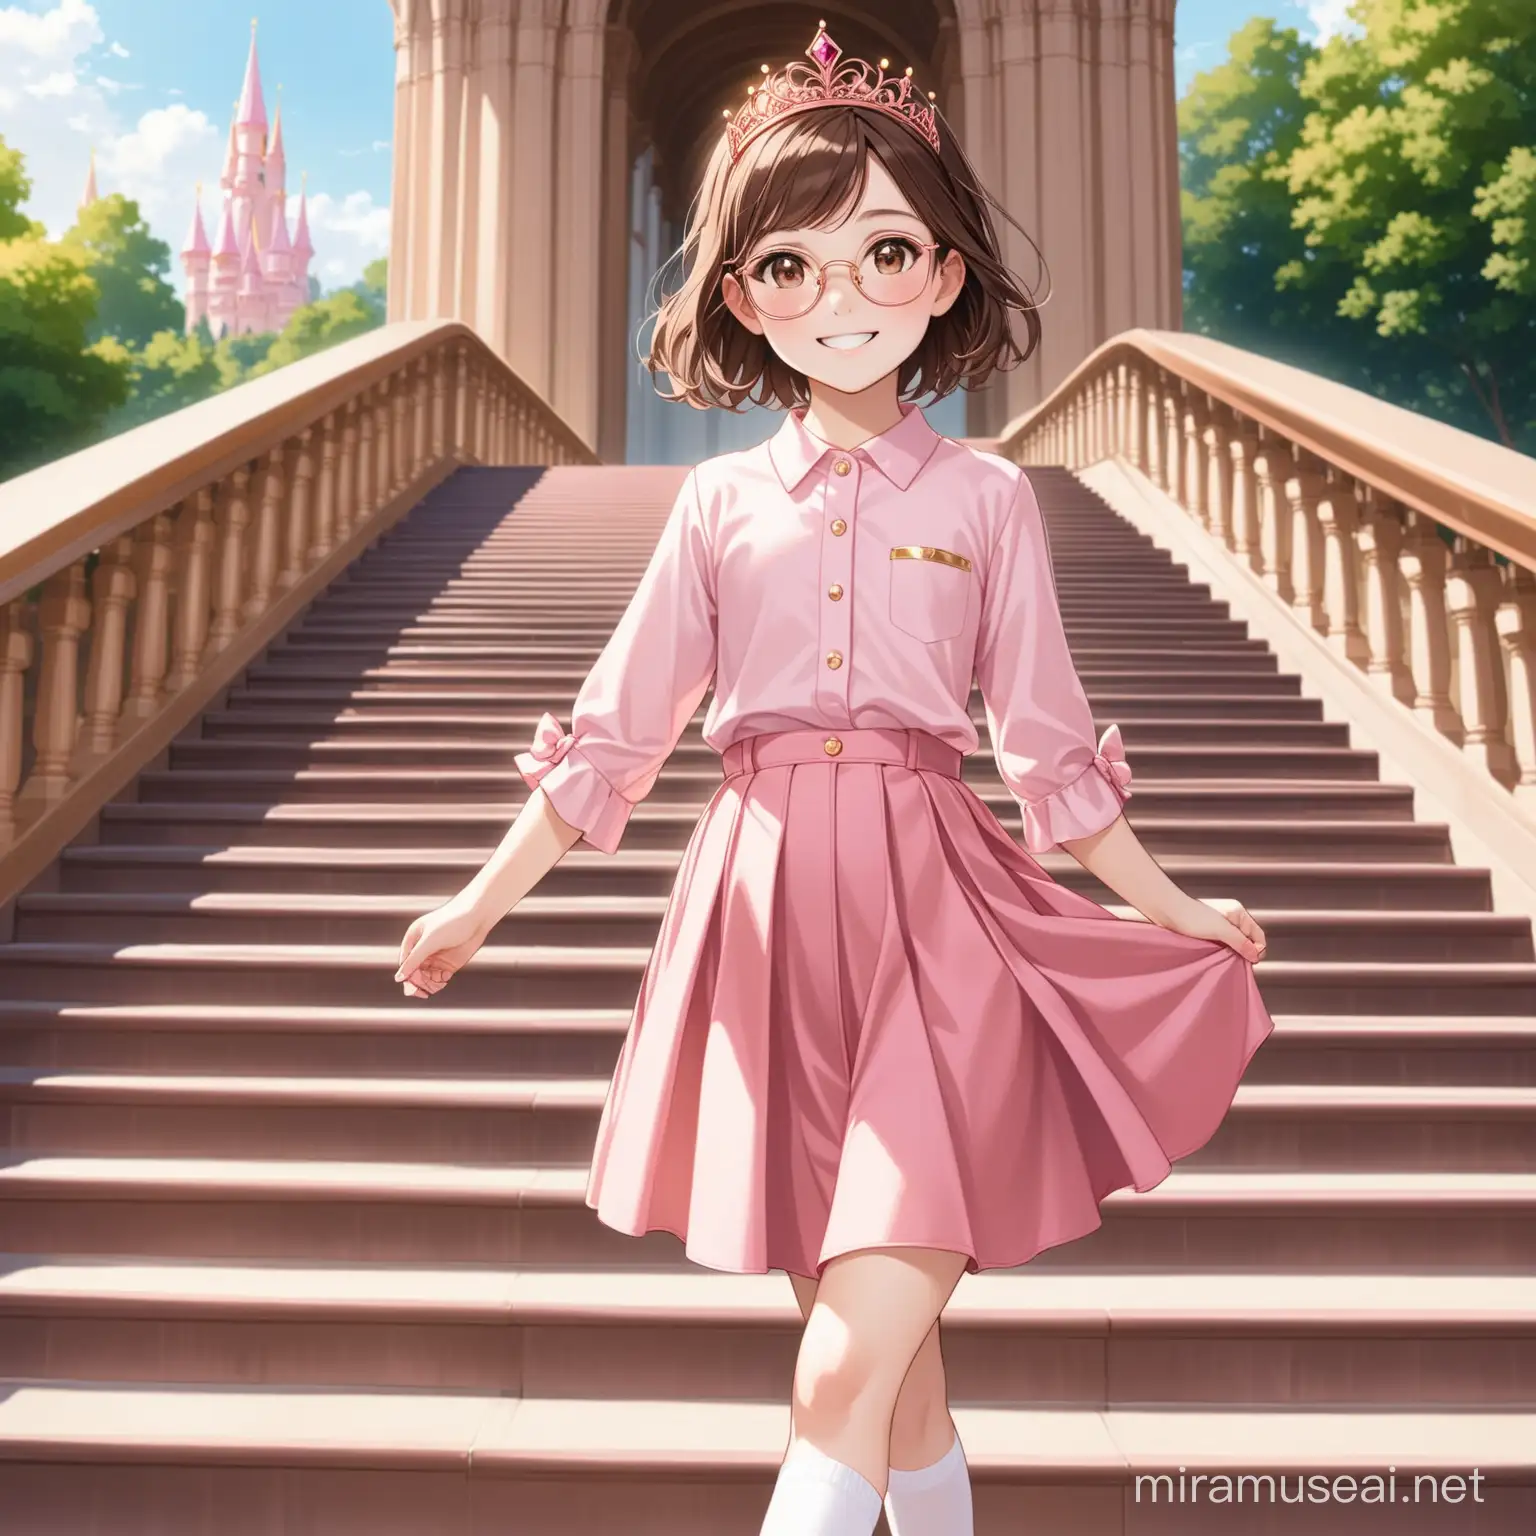 12 year old girl, short brown hair, brown eyes, rose gold glasses, smiling, pale pink buttoned shirt, dark pink knee length skirt with gold hem, rose gold tiara, white socks, pink mary janes, walking down an outdoor palace staircase